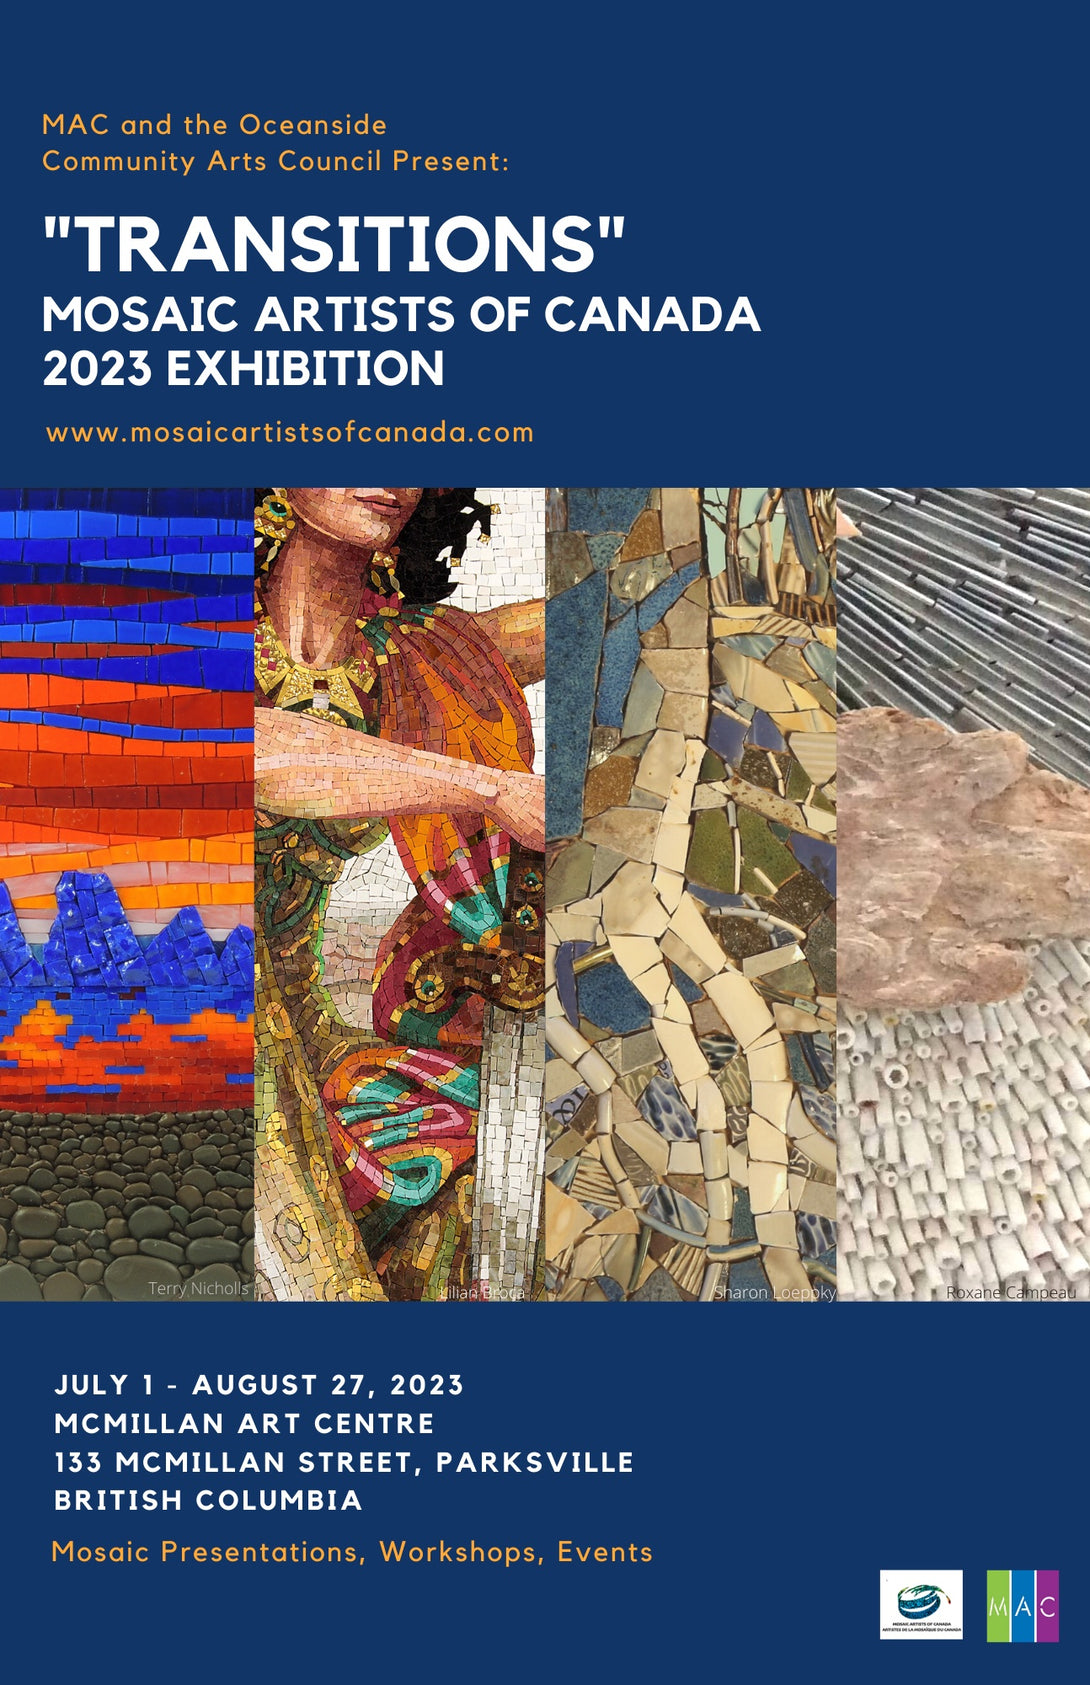 Tesselations - Mosaics in a Modern World, July 29, 2023 - 11:30am, with Debra Hagen by McMillan Arts Centre - McMillan Arts Centre - Vancouver Island Art Gallery